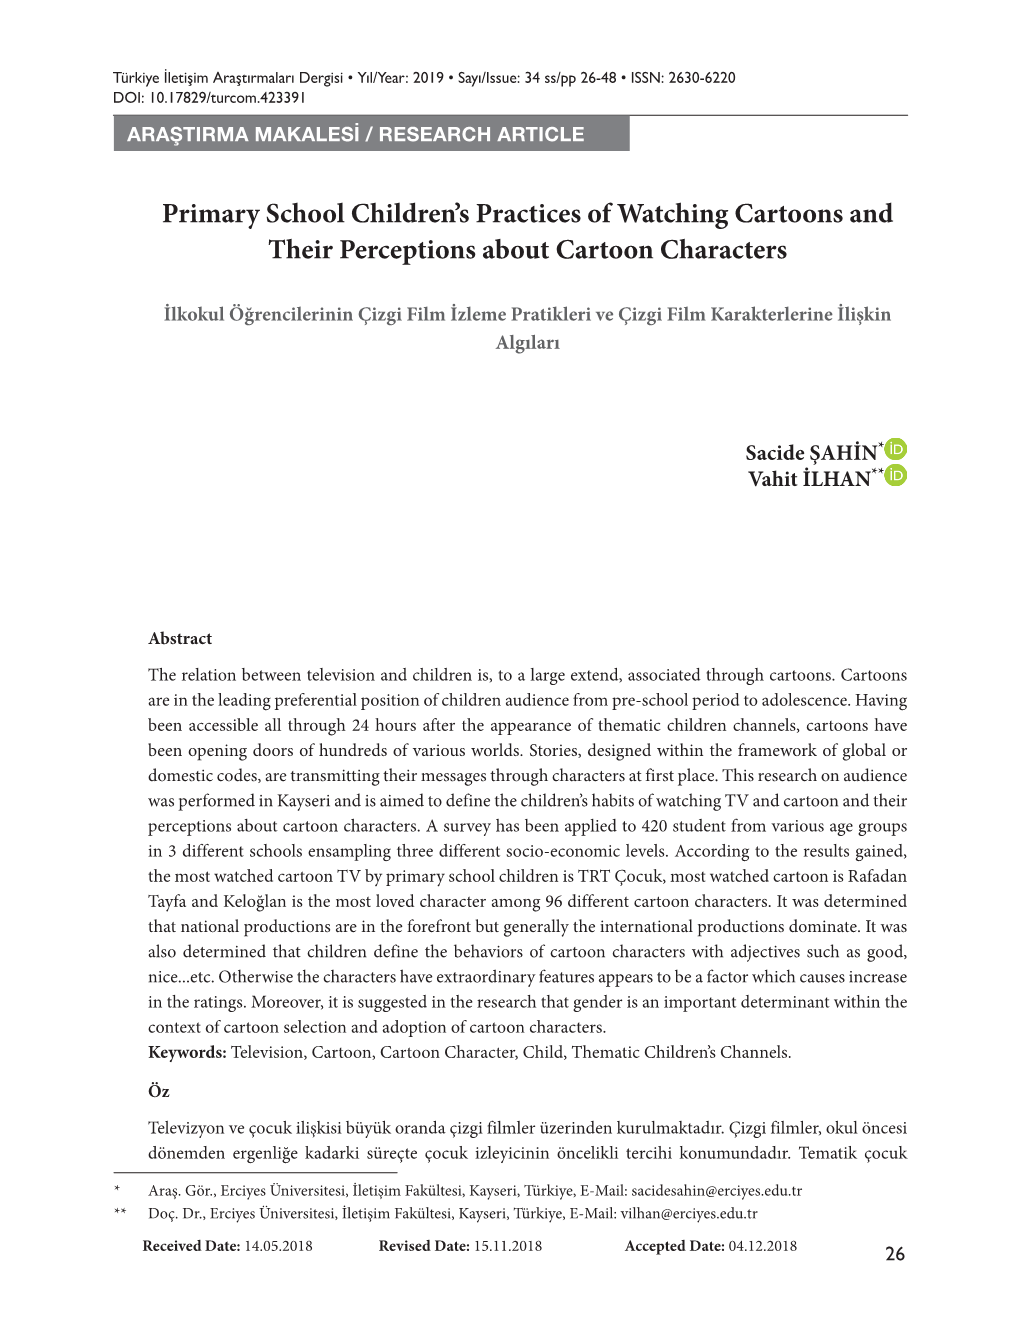 Primary School Children's Practices of Watching Cartoons and Their